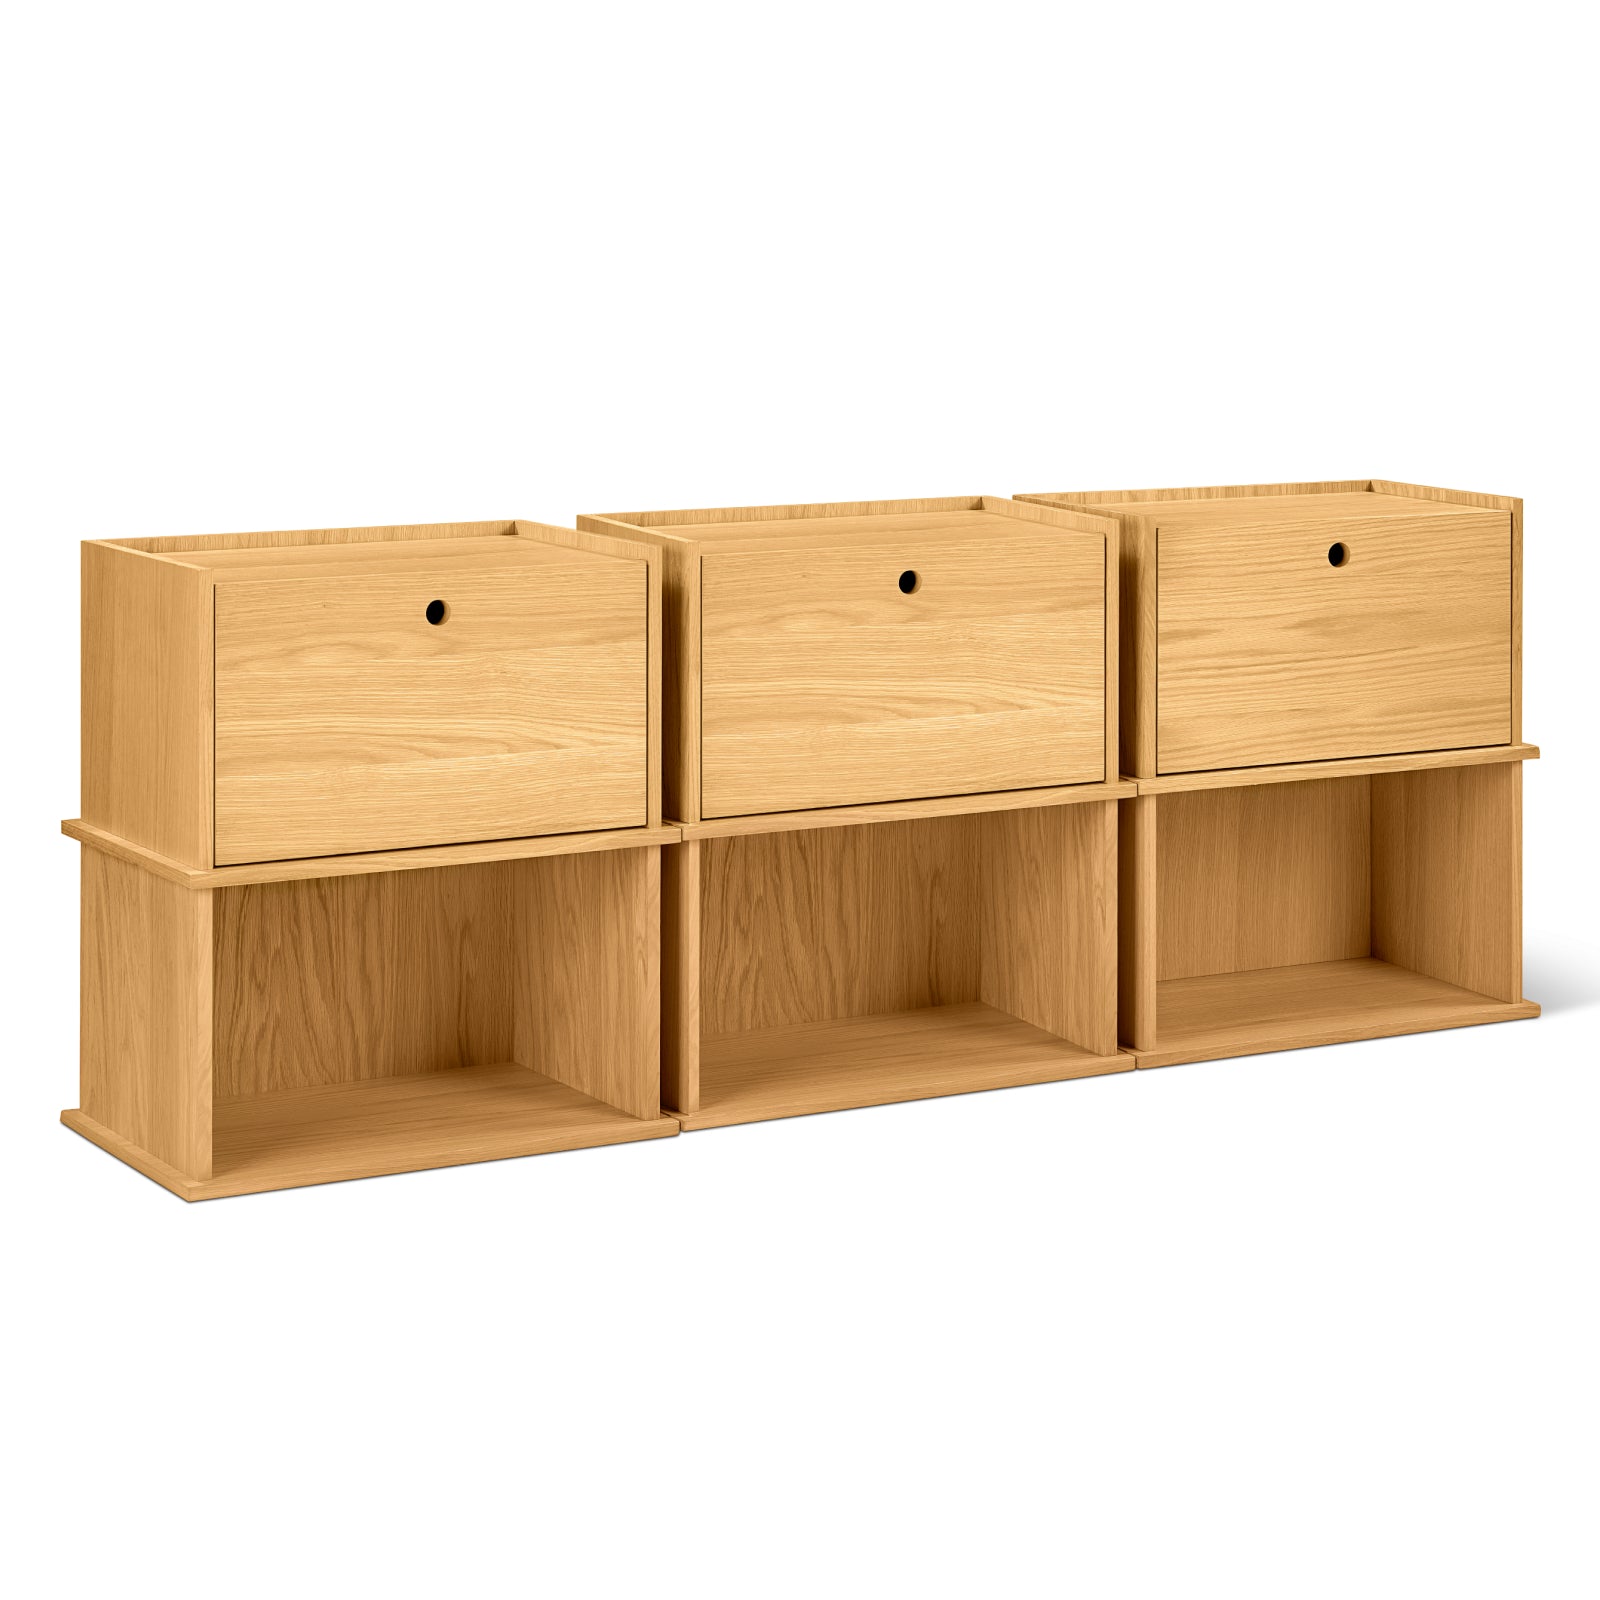 Keep Stacking Storage System 6-Piece, Open and Closed, Oak - Image 12